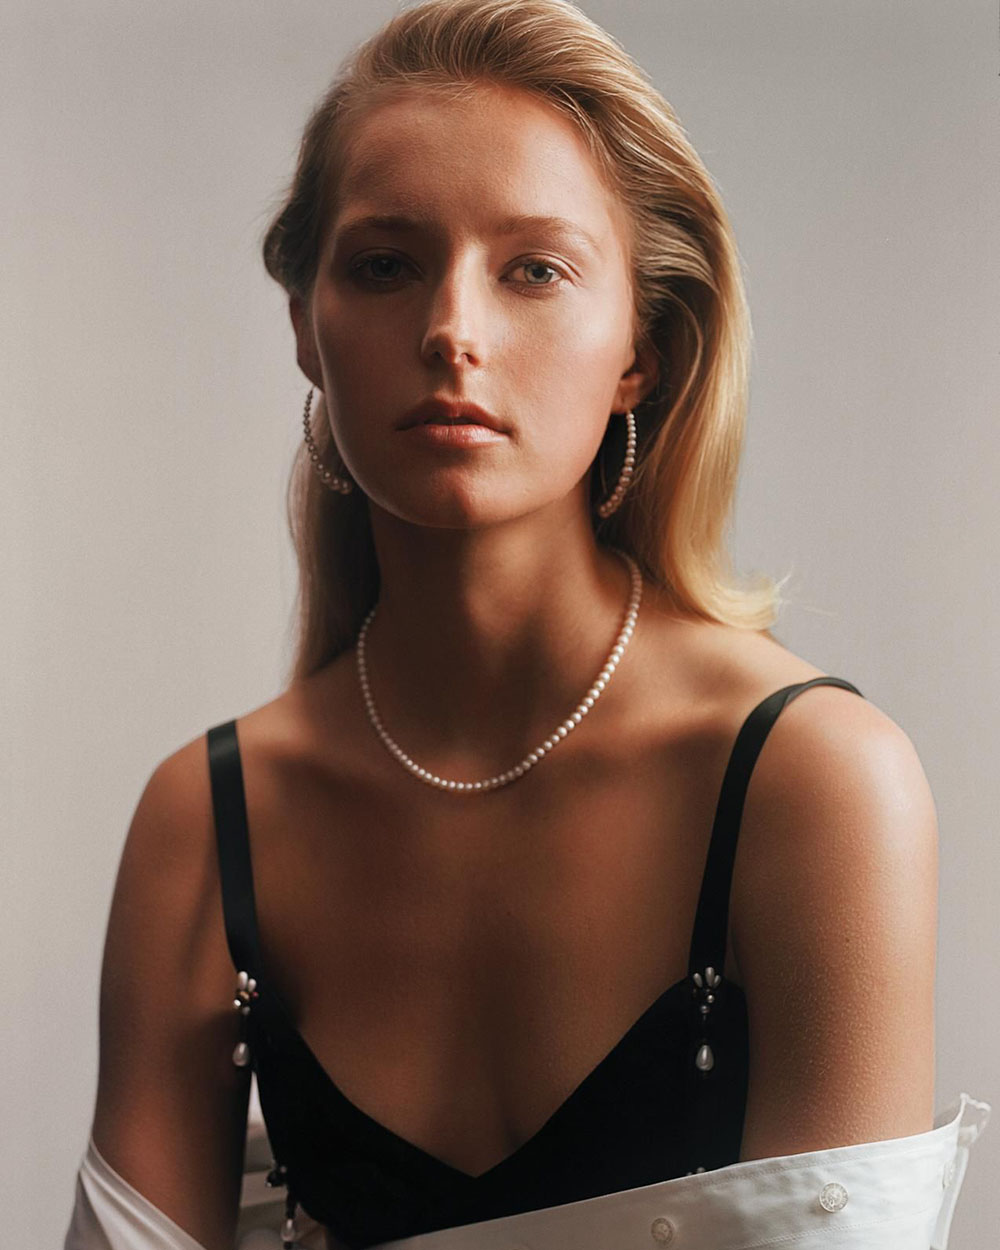 Natalie Ludwig by Remi Pujol for WSJ. Magazine May 2020